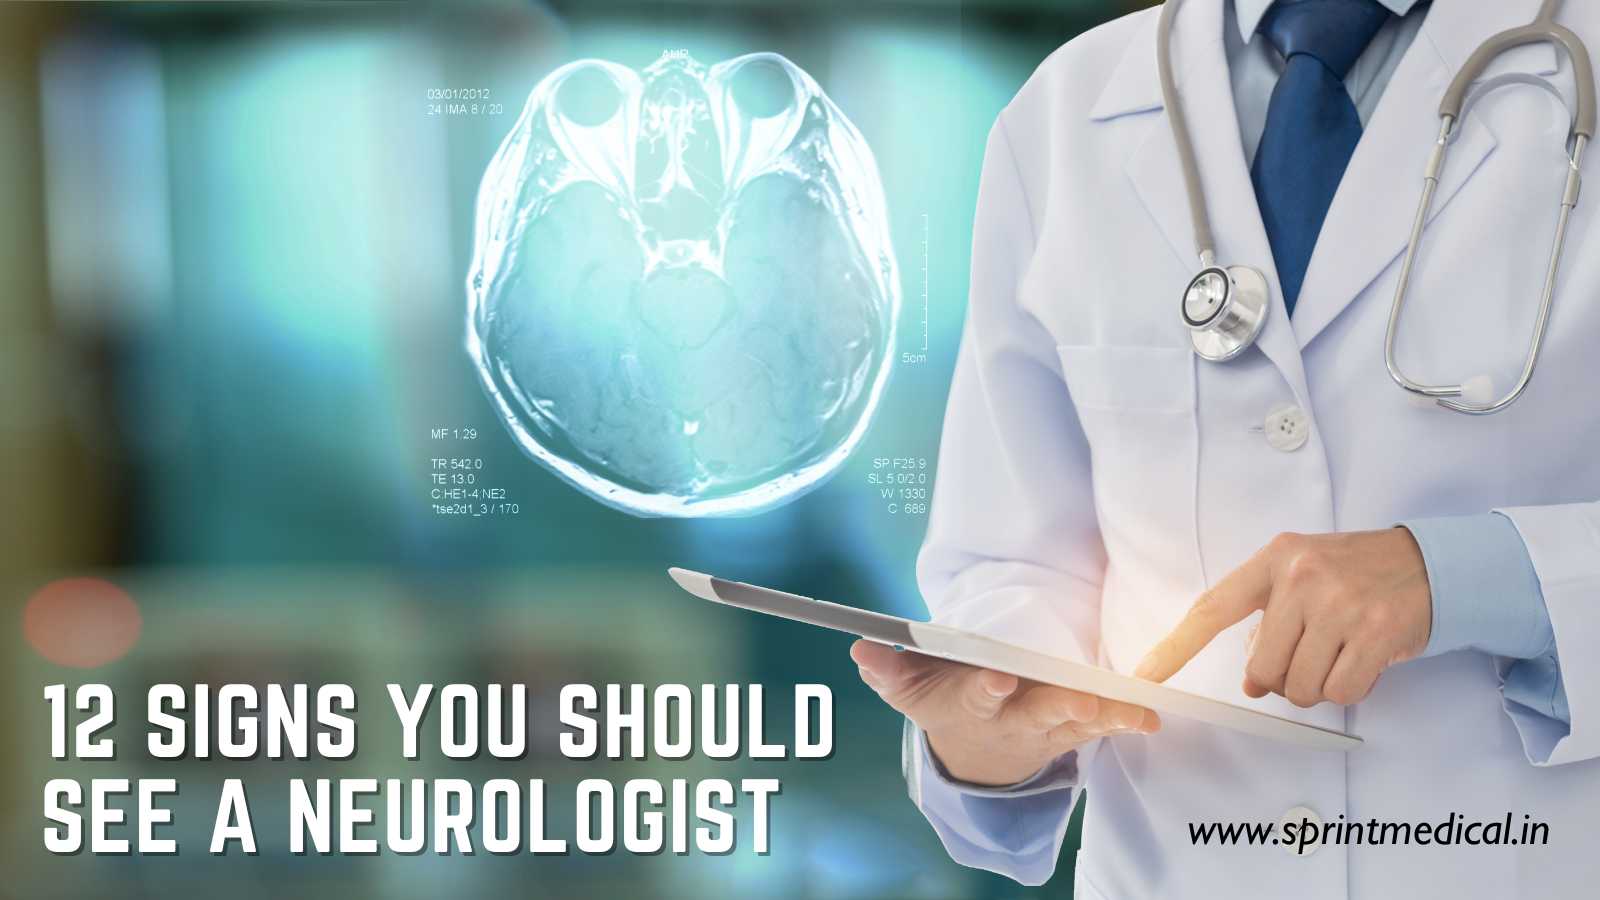 12 Signs You Should See a Neurologist